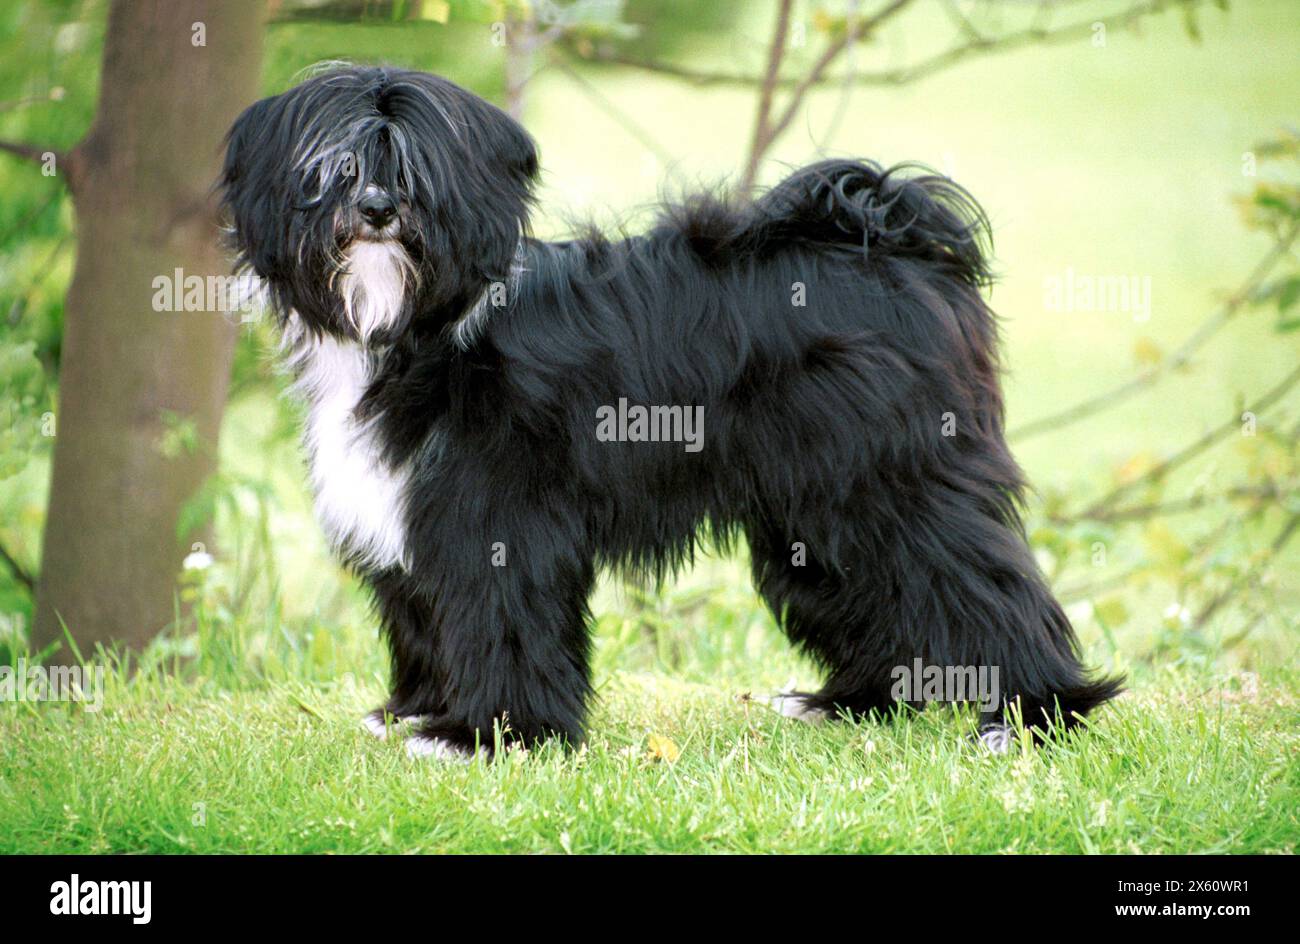 A Black and White Tibetan Terrier Looking towards the Camera Stock Photo